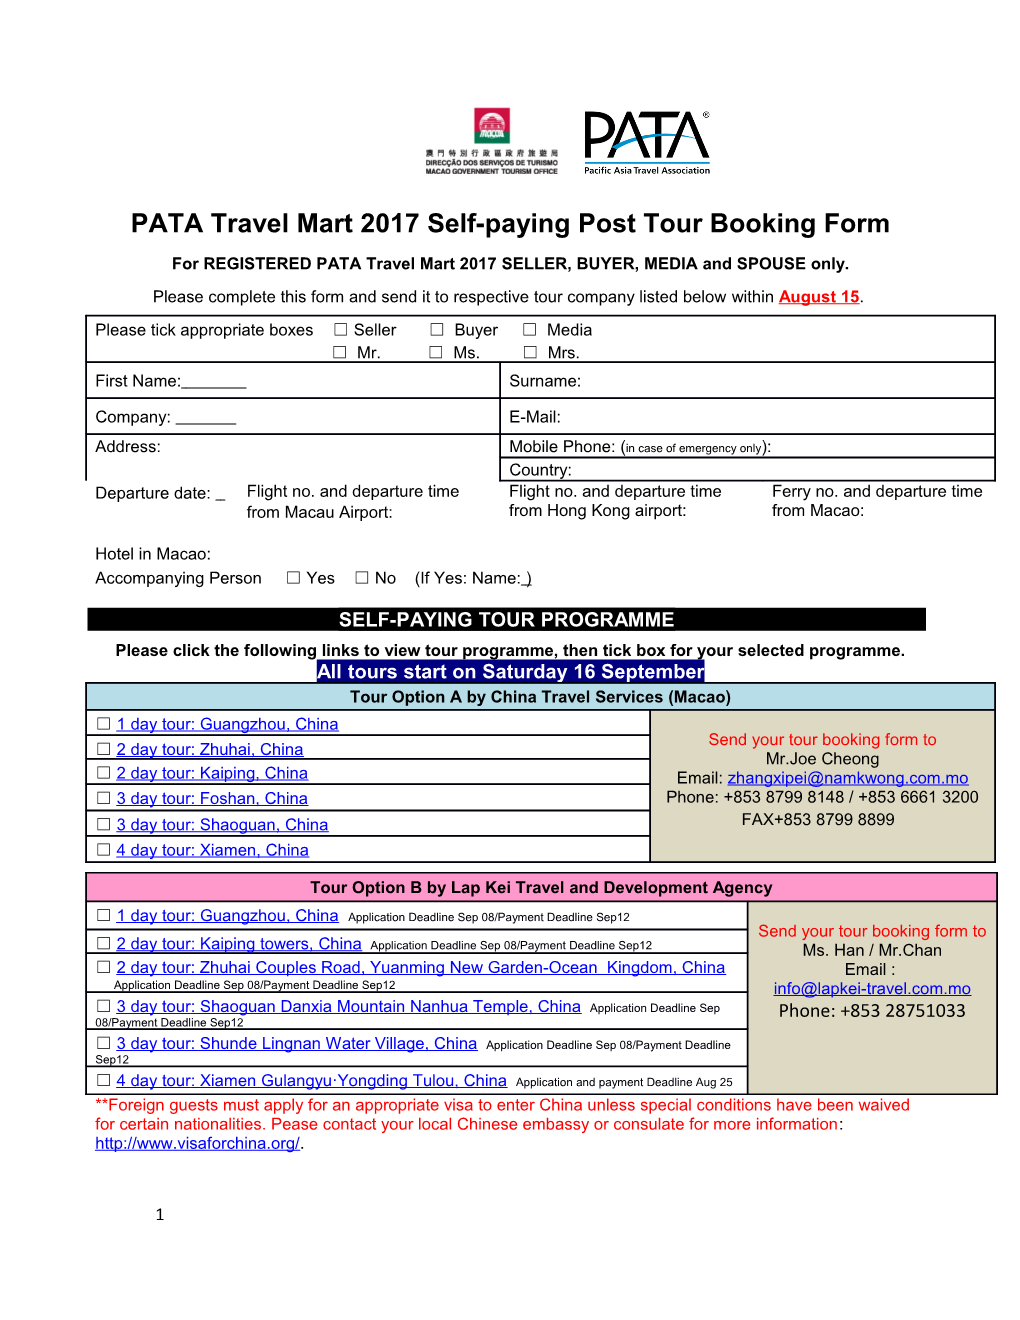 PATA Travel Mart 2017Self-Paying Post Tour Booking Form